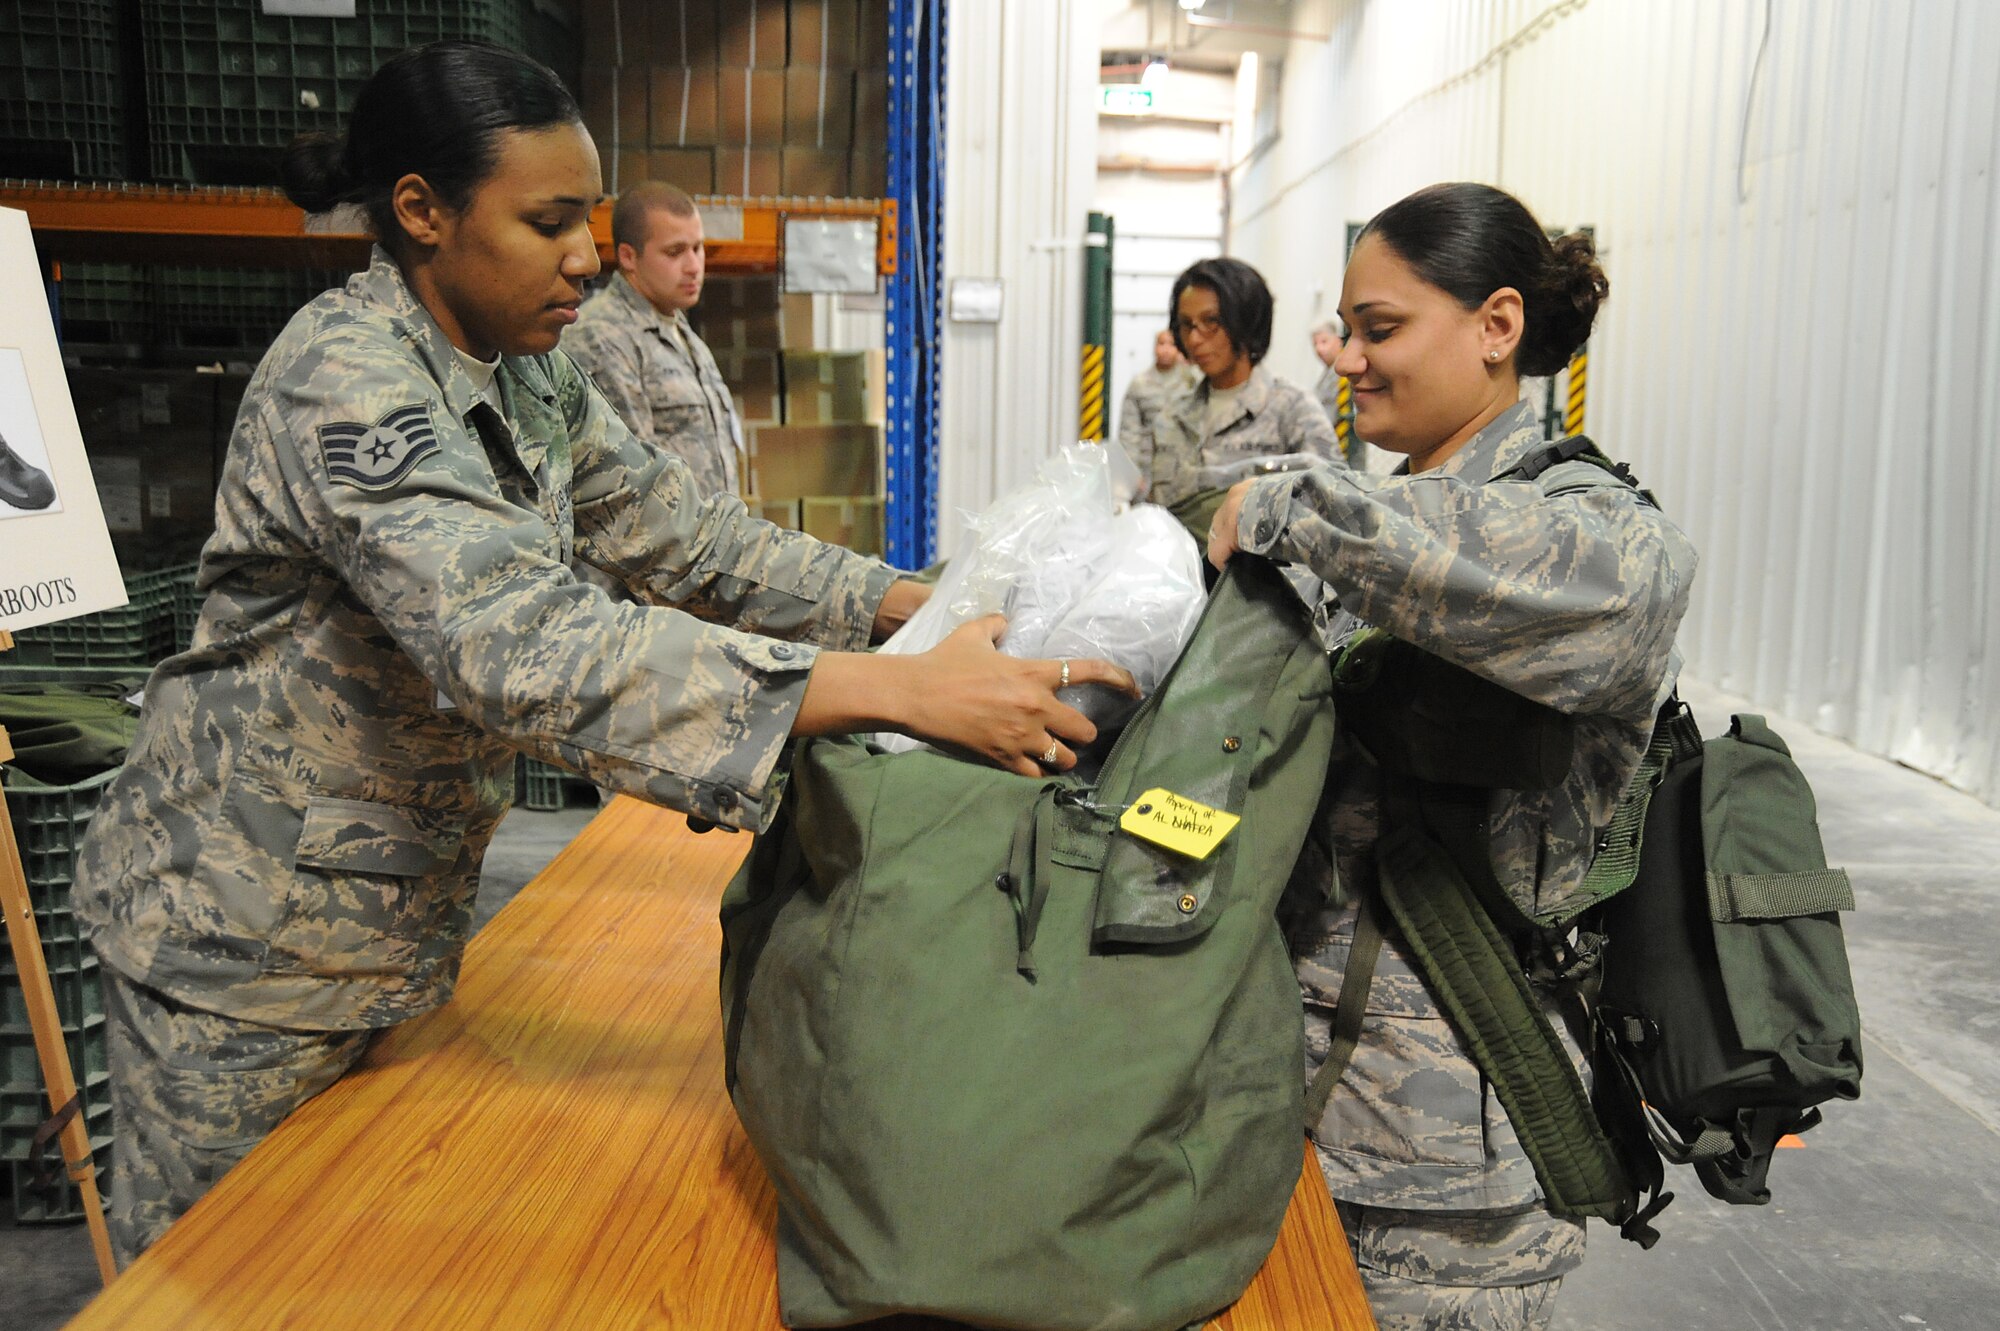 Staff Sgt. Bianca Cox, 380th Expeditionary Logistics Readiness Squadron, packs chemical boots into a C-bag for Staff Sgt. Michelle Gamble, 380th ELRS as she processes through a deployment line during a readiness exercise, April 21 at undisclosed location in Southwest Asia. The 380th ELRS ran the exercise to test the timeliness and capability for redeployment of Airmen. Sergeant Cox is deployed from Eglin AFB, Fla. and hails from Hampton, Va. Sergeant Gamble is deployed from Holloman AFB, N.M. and hails from Spring Hill, Fla. (U.S. Air Force photo by Senior Airman Brian J. Ellis) (Released)